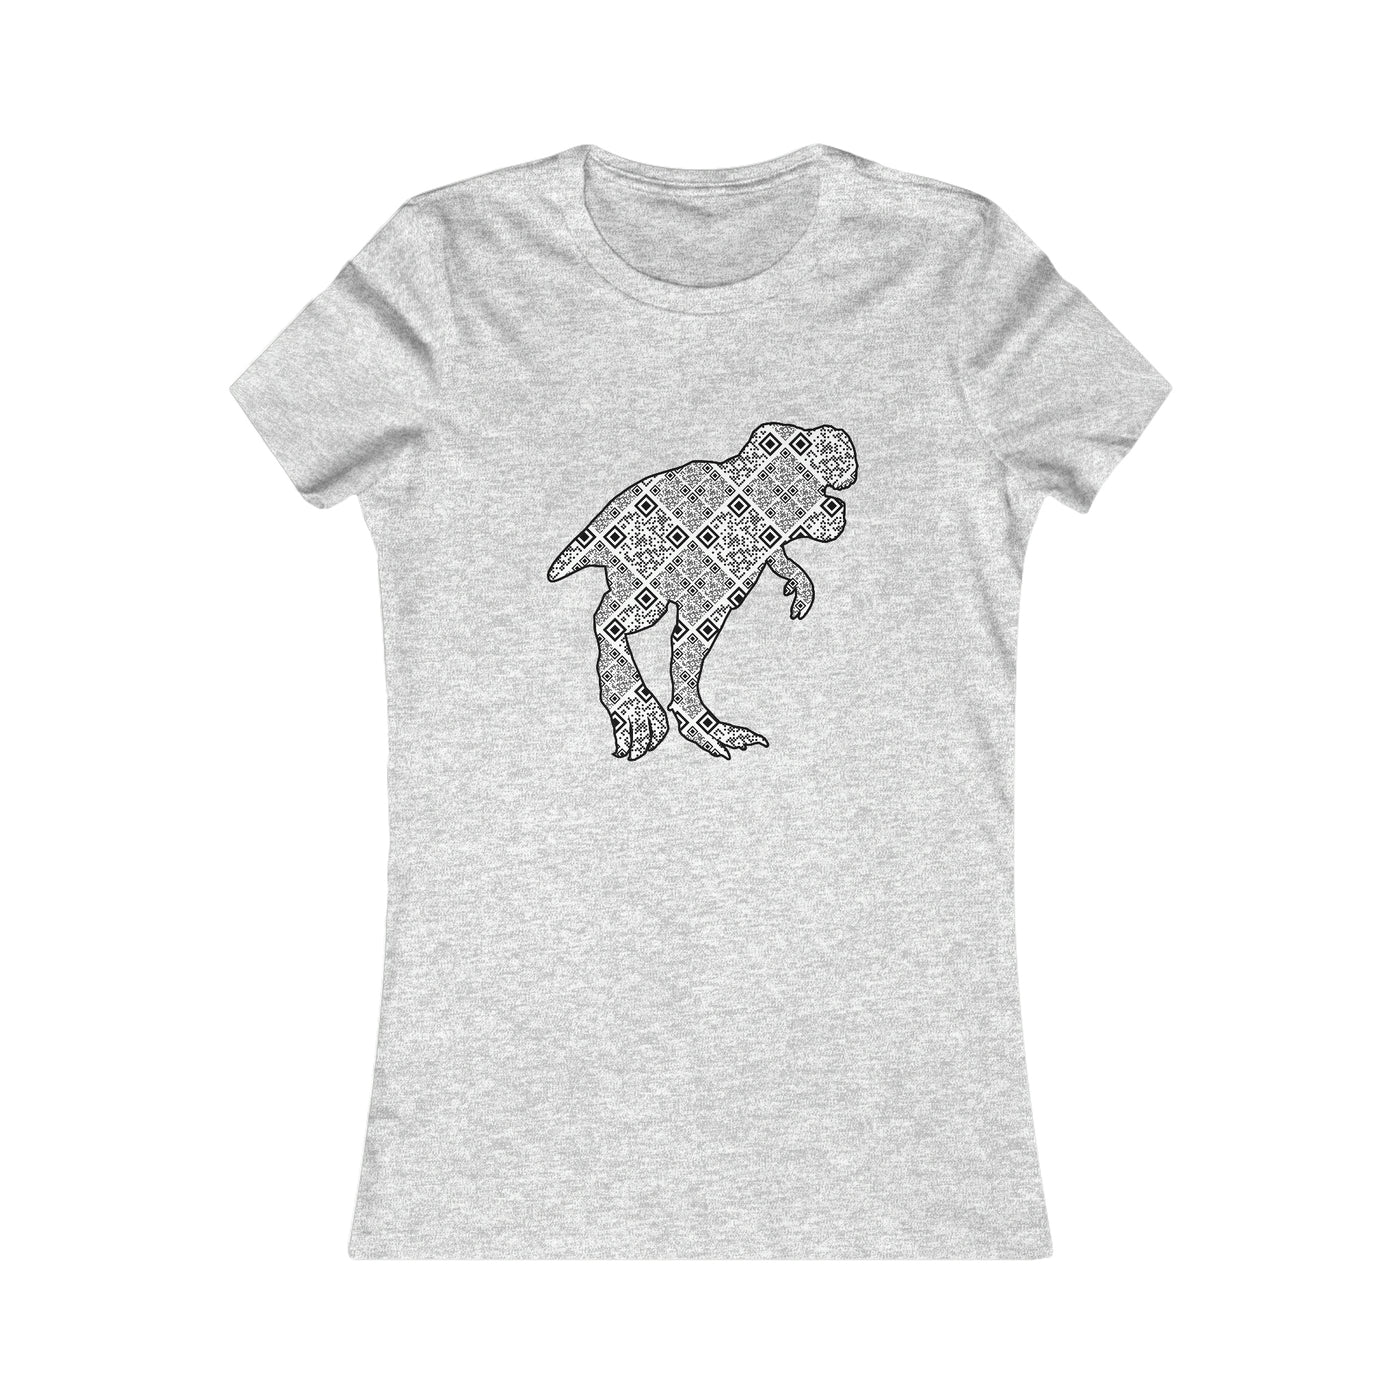 XR Reality Collection: Jurassic Stomp (Women's) Adult Fitted T-Shirt